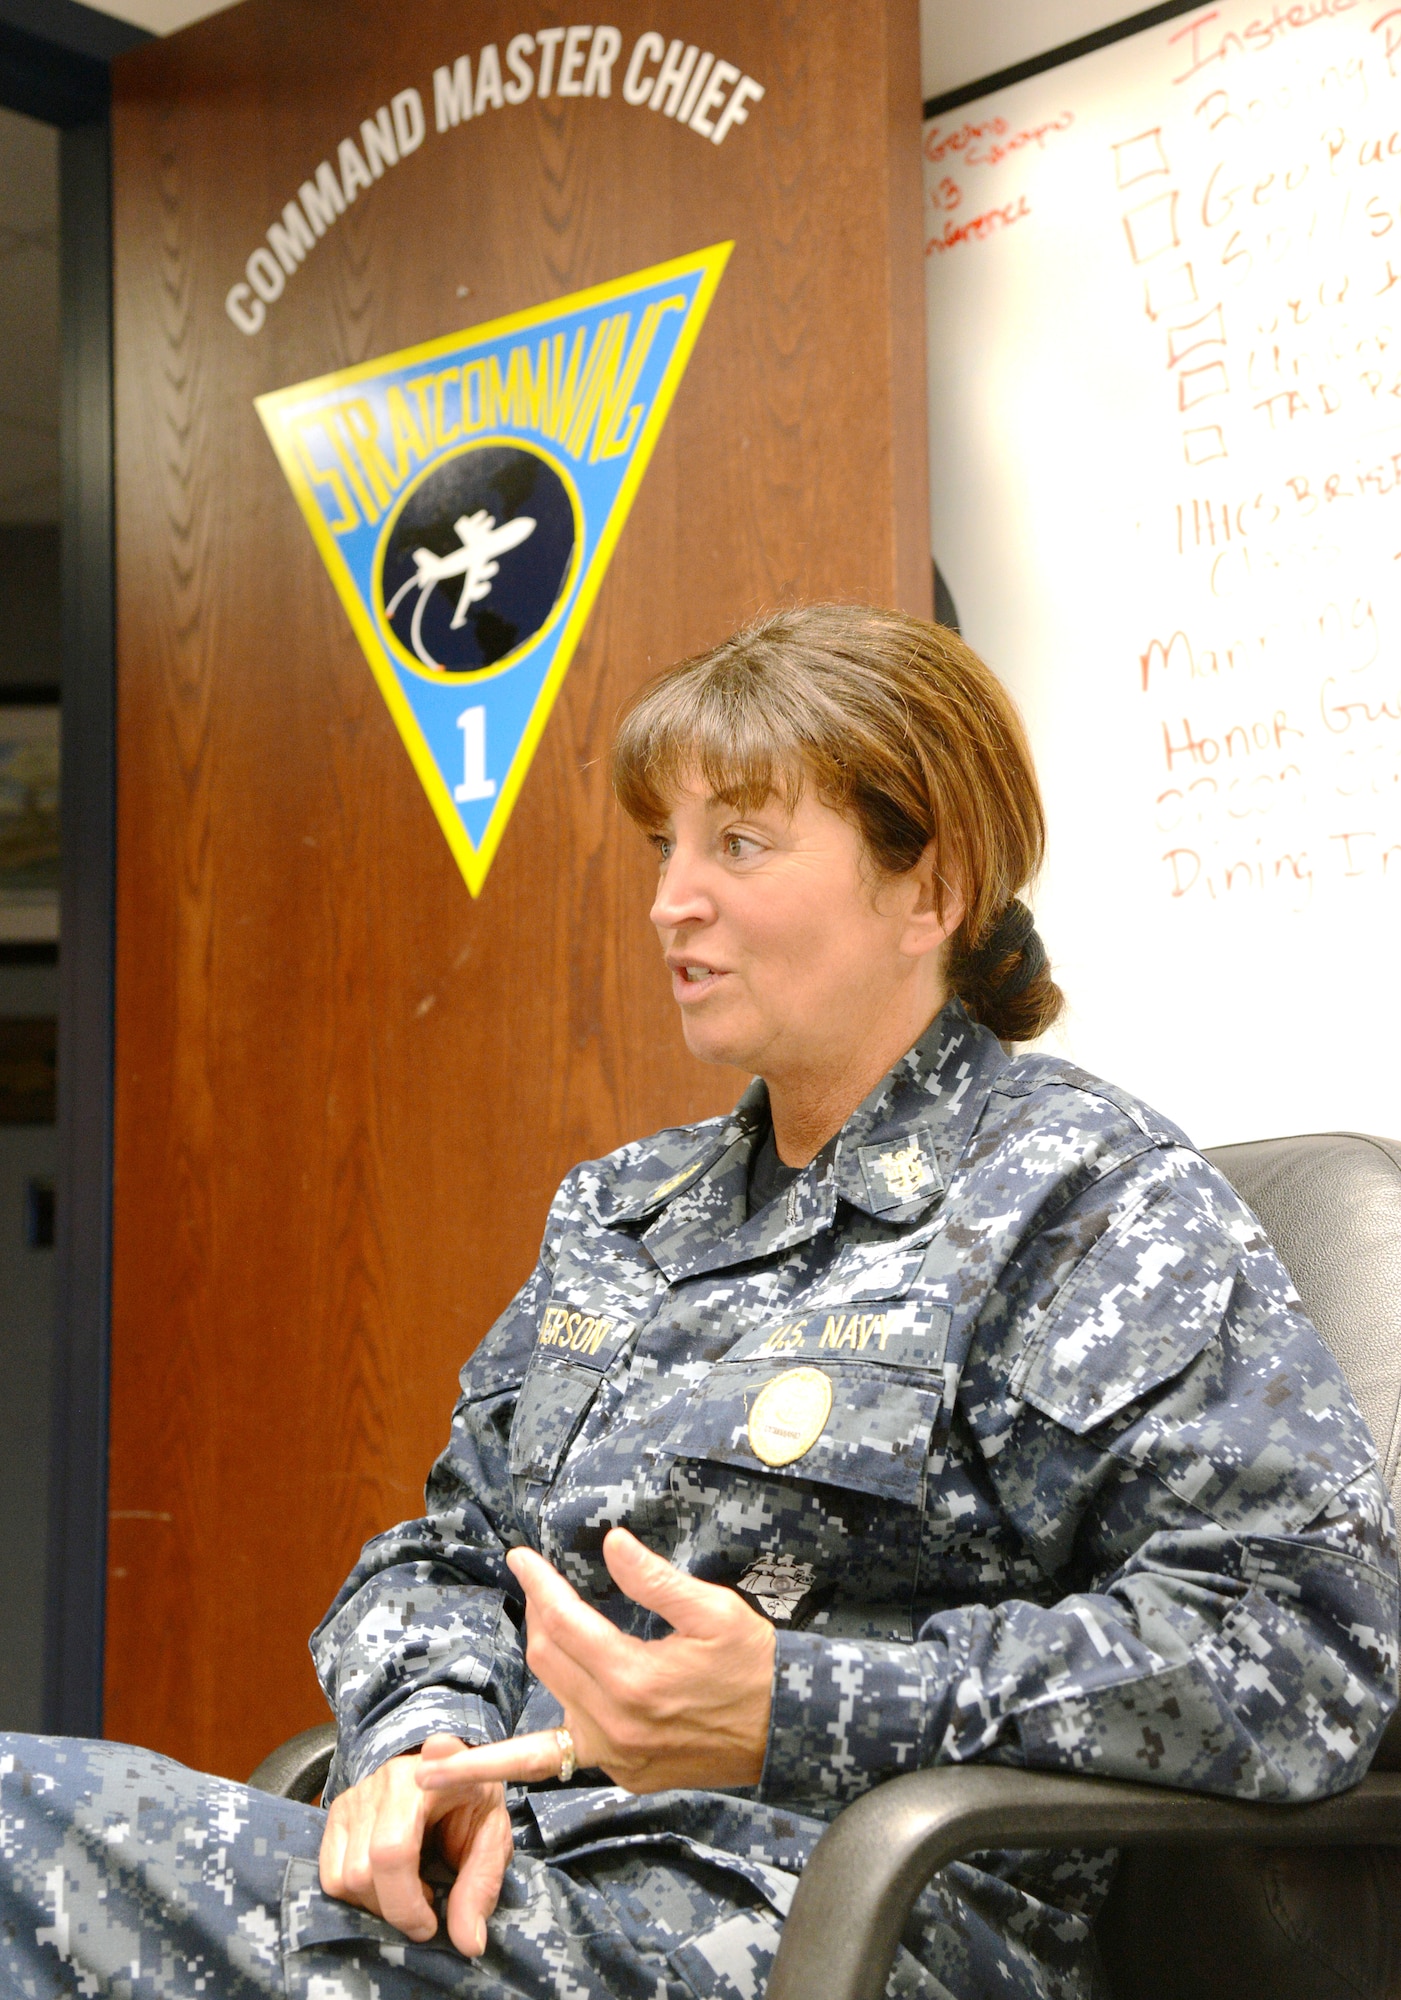 Strategic Communications Wing One Command Master Chief Cynthia Patterson reminisces about the differences in women's roles from being in the Navy now compared to when she enlisted in 1985. She cites that she would not be where she is today without support from her family and the help of numerous mentors along the way. (Air Force photo by Kelly White)